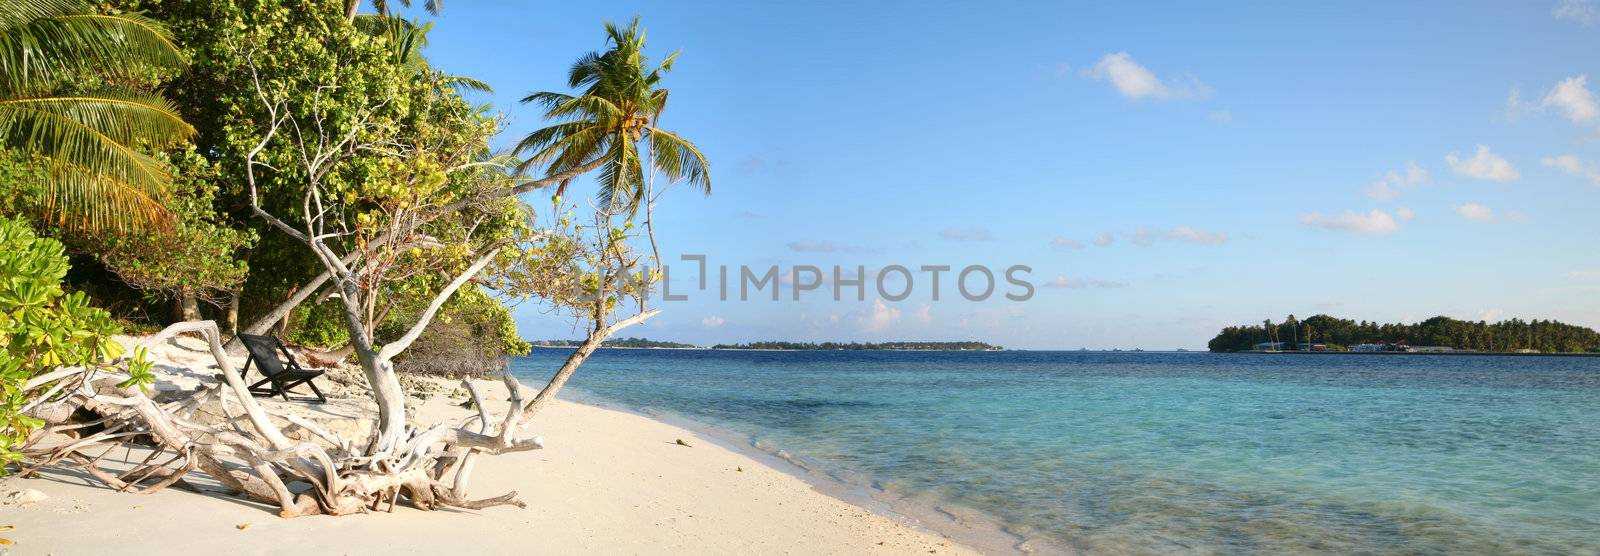 Coconut tree on the beach in the Maldives